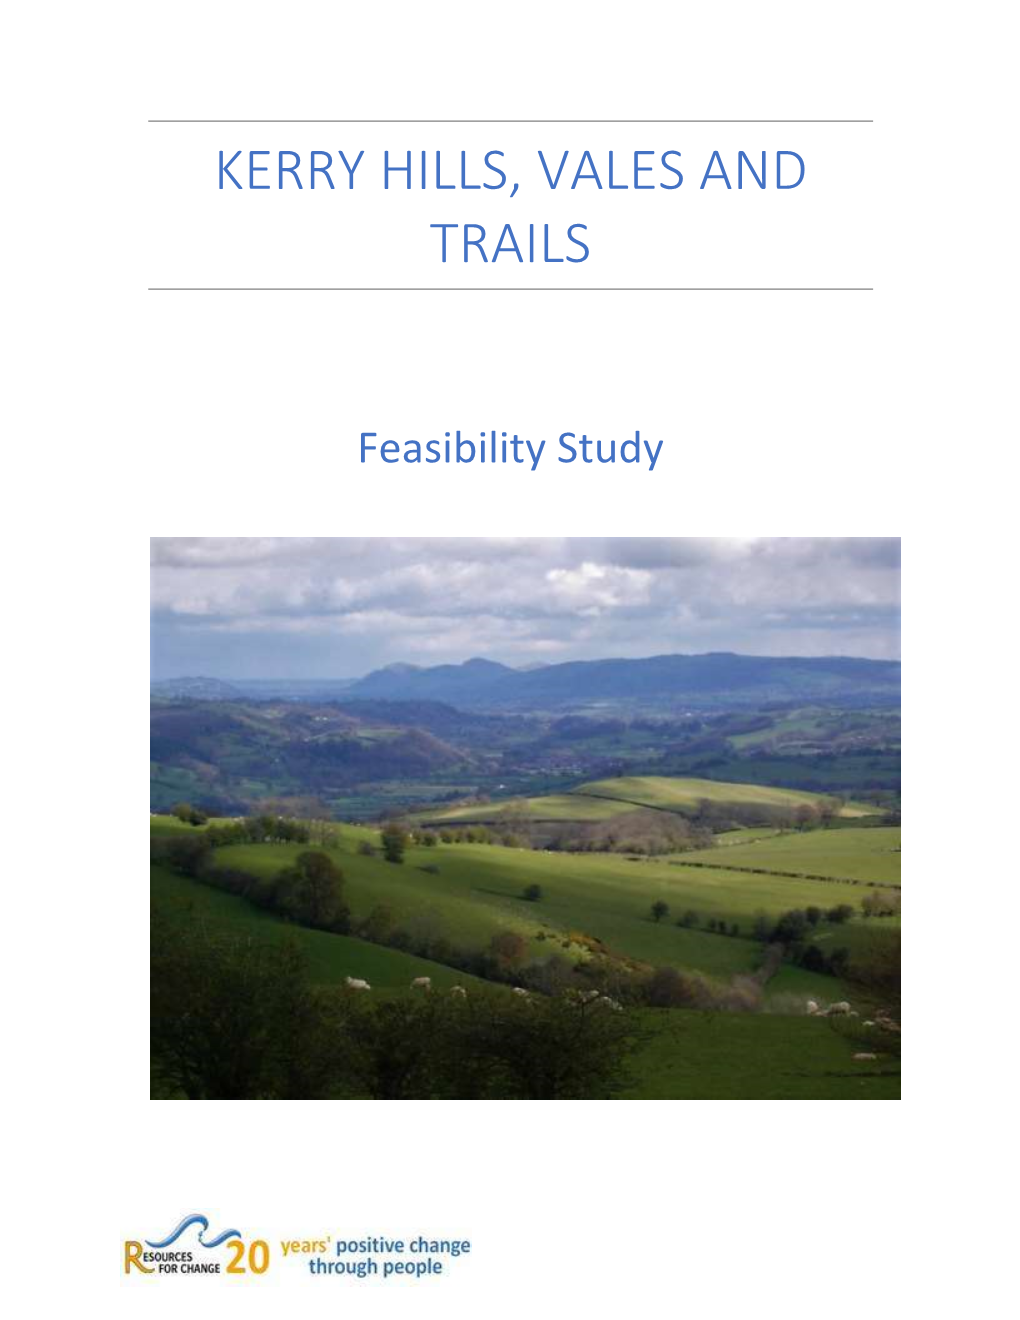 Kerry Hills, Vales and Trails